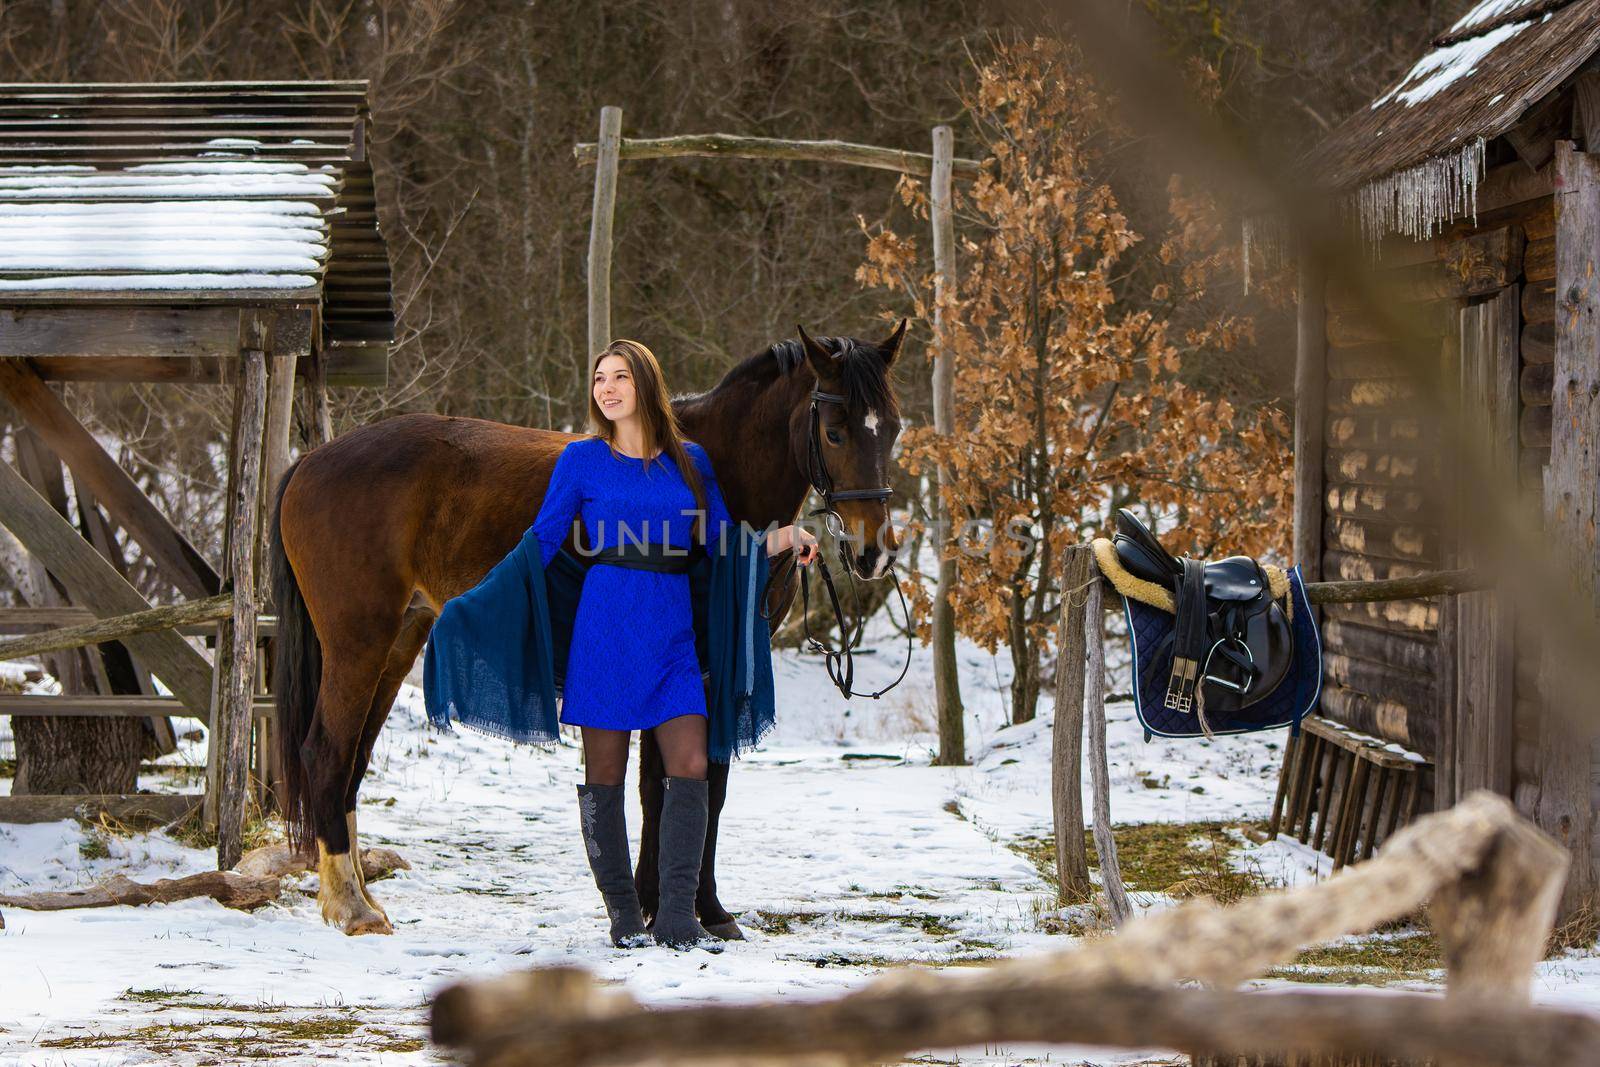 A beautiful girl in a blue dress stands with a horse against the background of old wooden buildings in a winter forest a